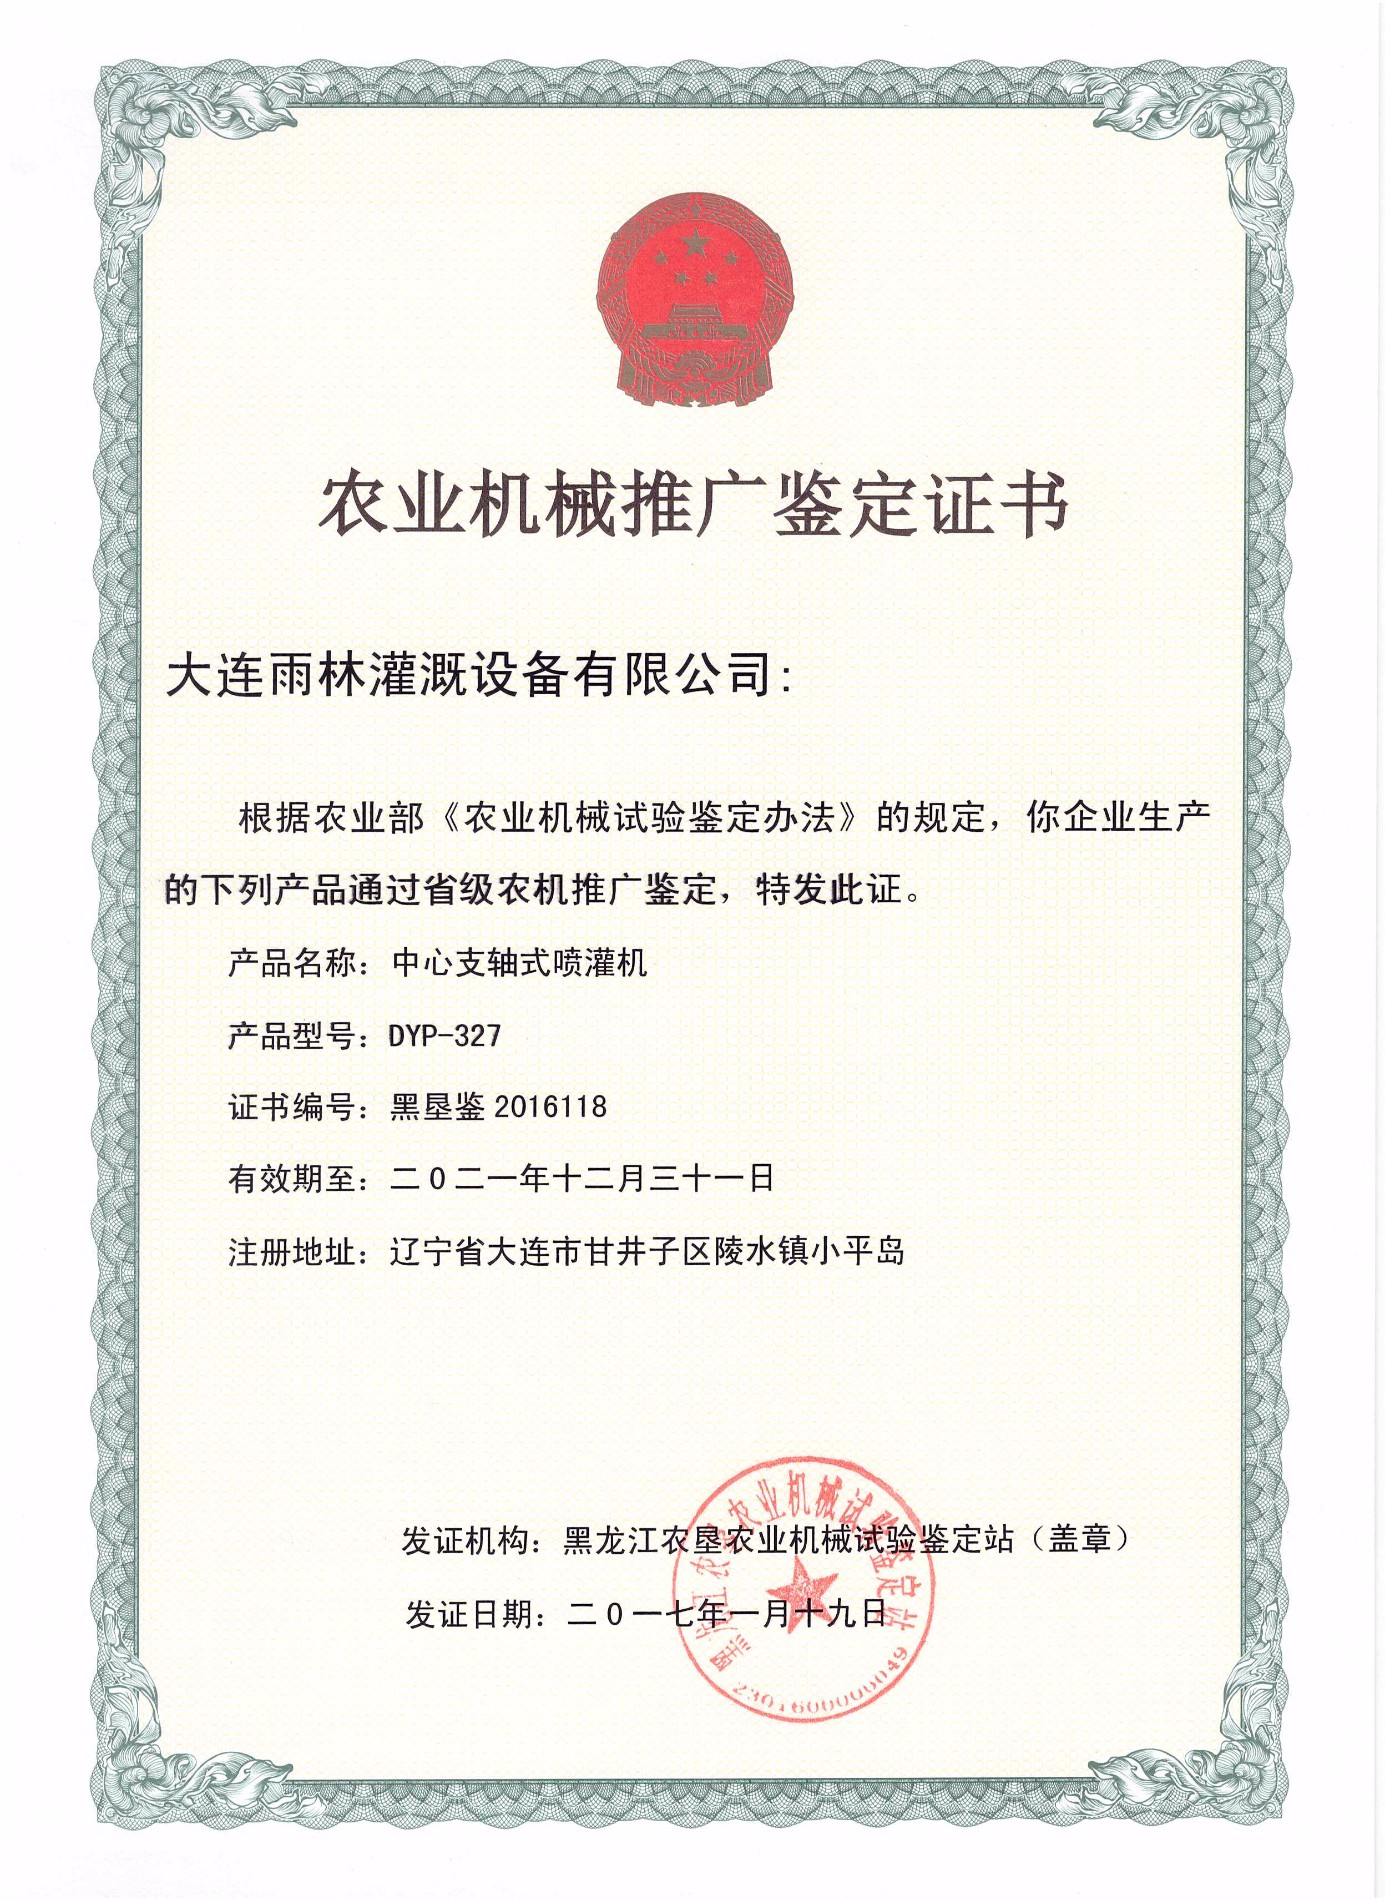 CERTIFICATE OF DYP-327